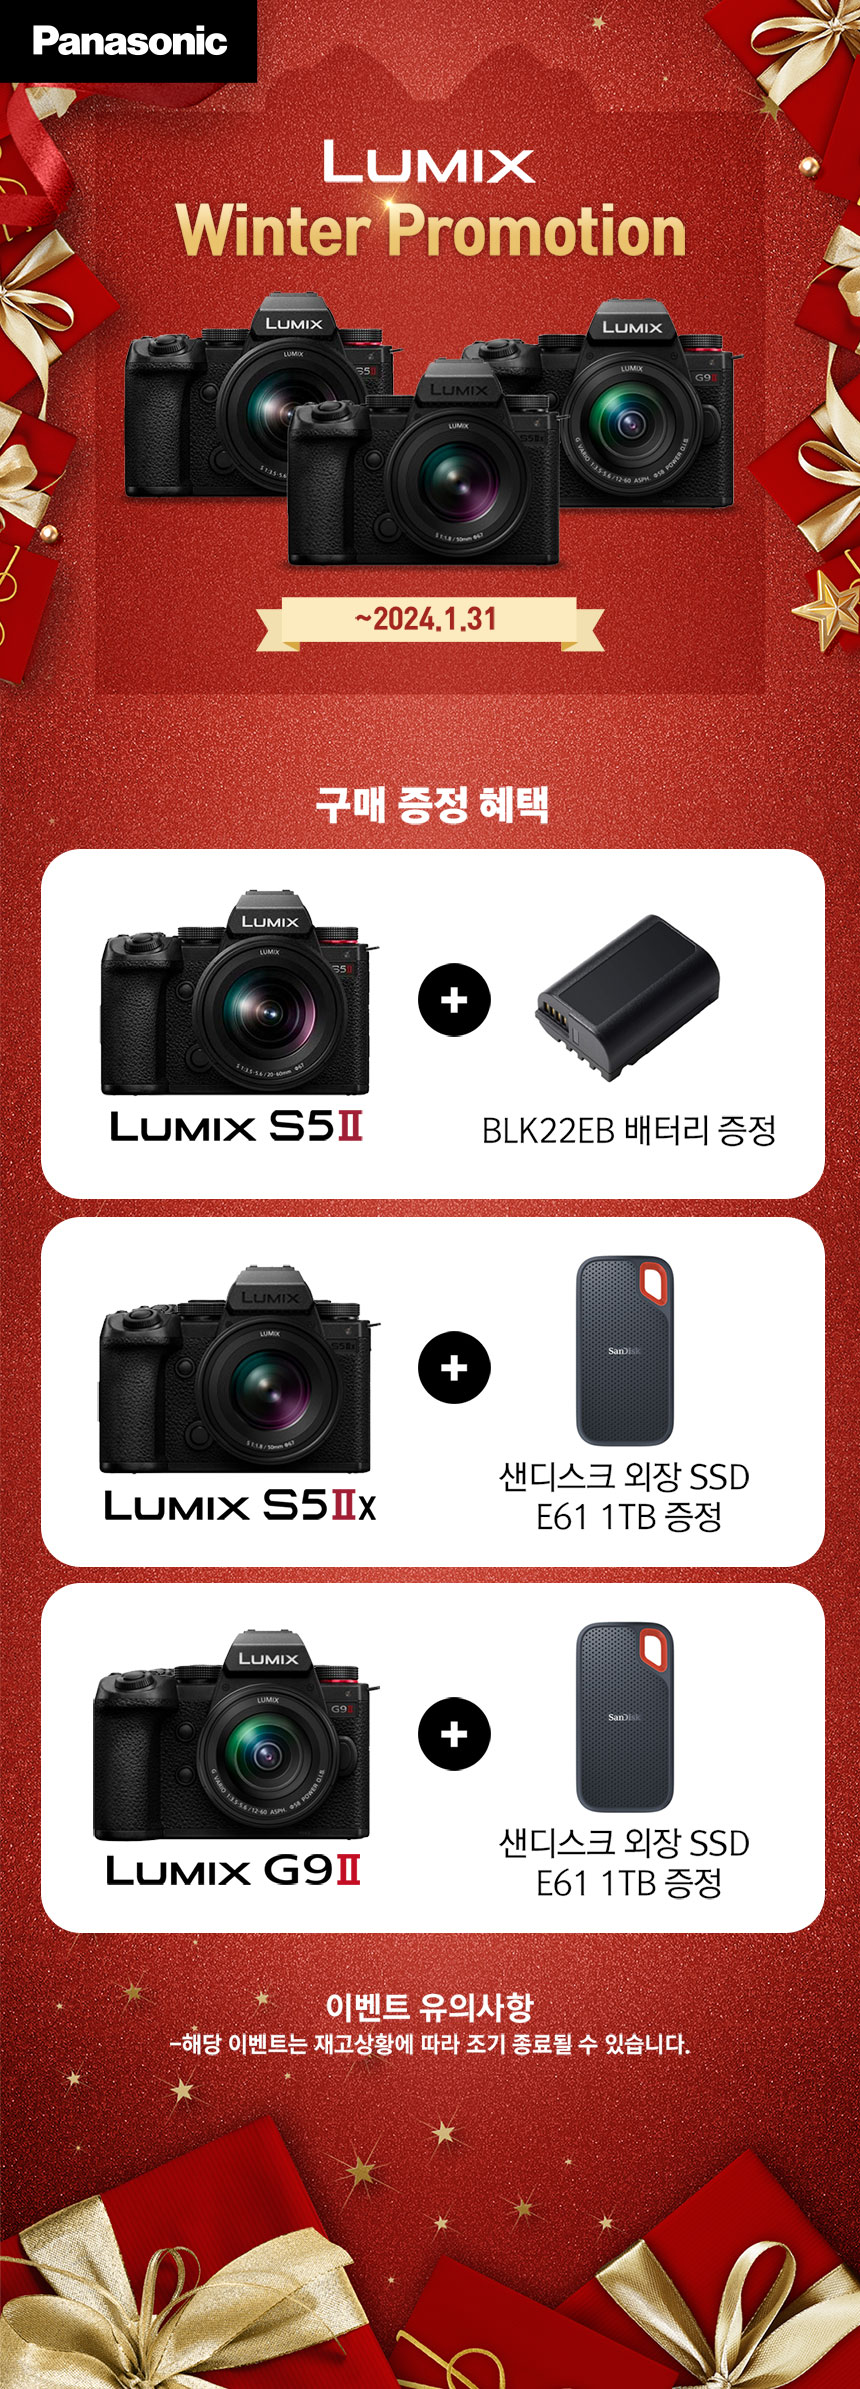 https://www.panasonic.co.kr/event/events_view.do?seq=76&tabcnt=tabcnt1